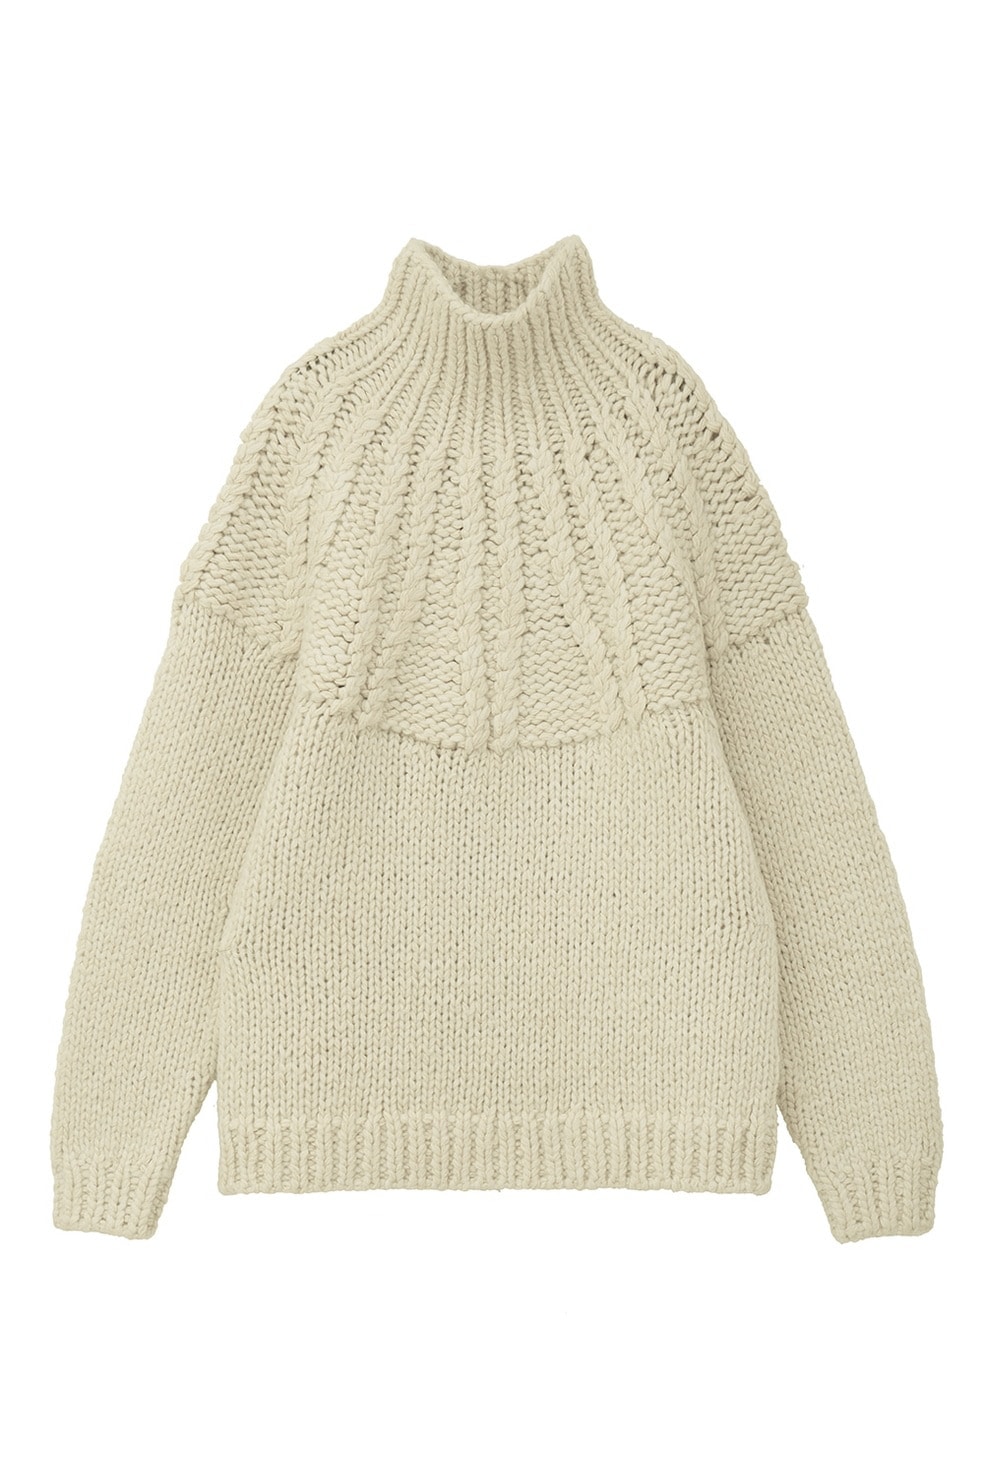 CHUNKY CABLE HAND KNIT TOPS｜TOPS(トップス)｜CLANE OFFICIAL ONLINE